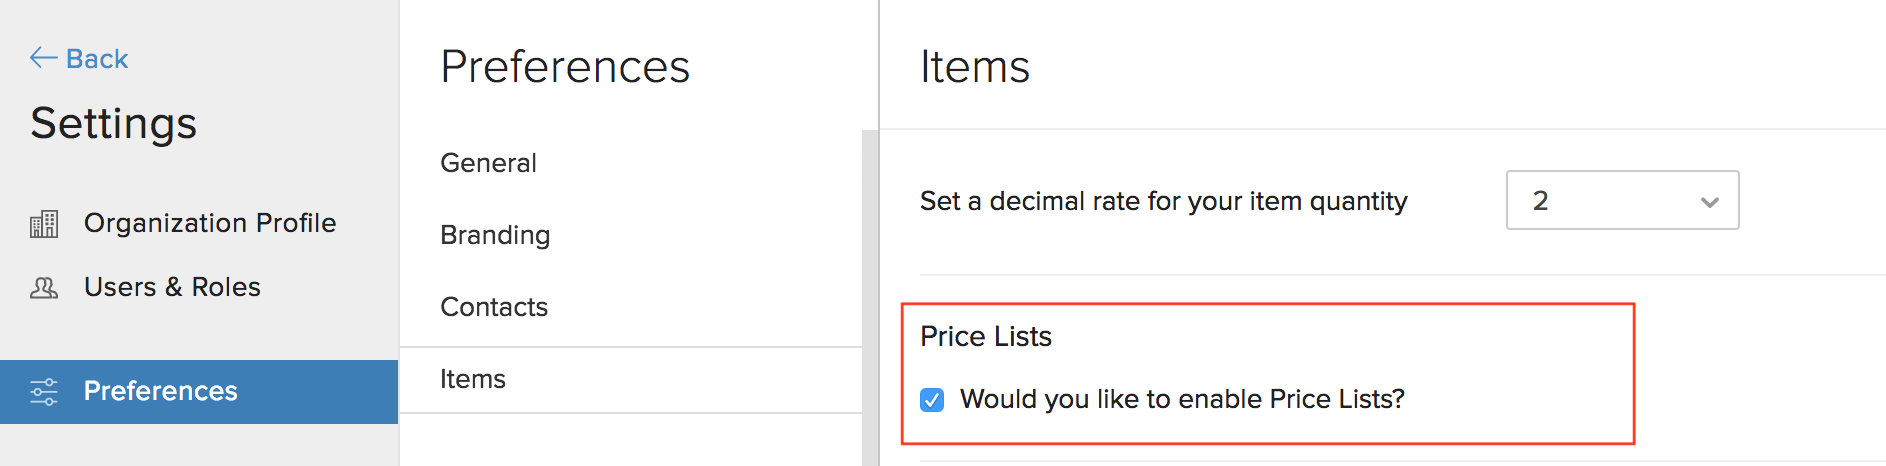 Enable Price Lists Image